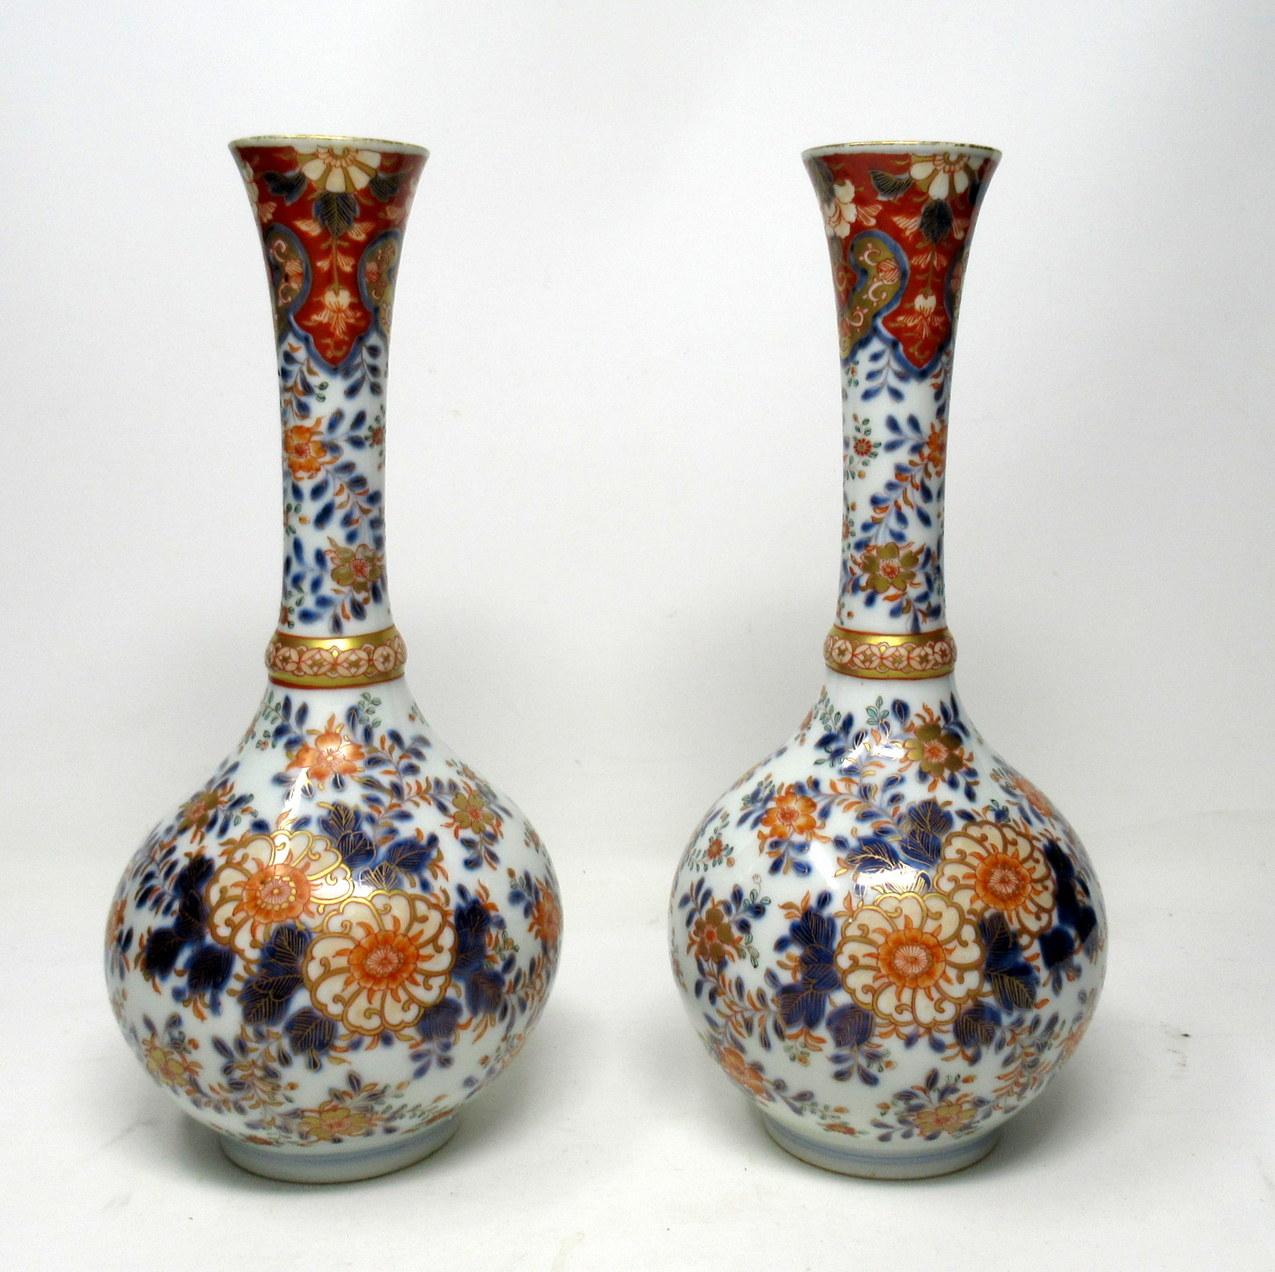 Stunning pair of Chinese or Japanese Imari bottle vases of compact size, made during the last quarter of the 19th century.

The tall elegant slender circular necks with gently flaring rims above a bulbous circular body on ring support bases. Hand